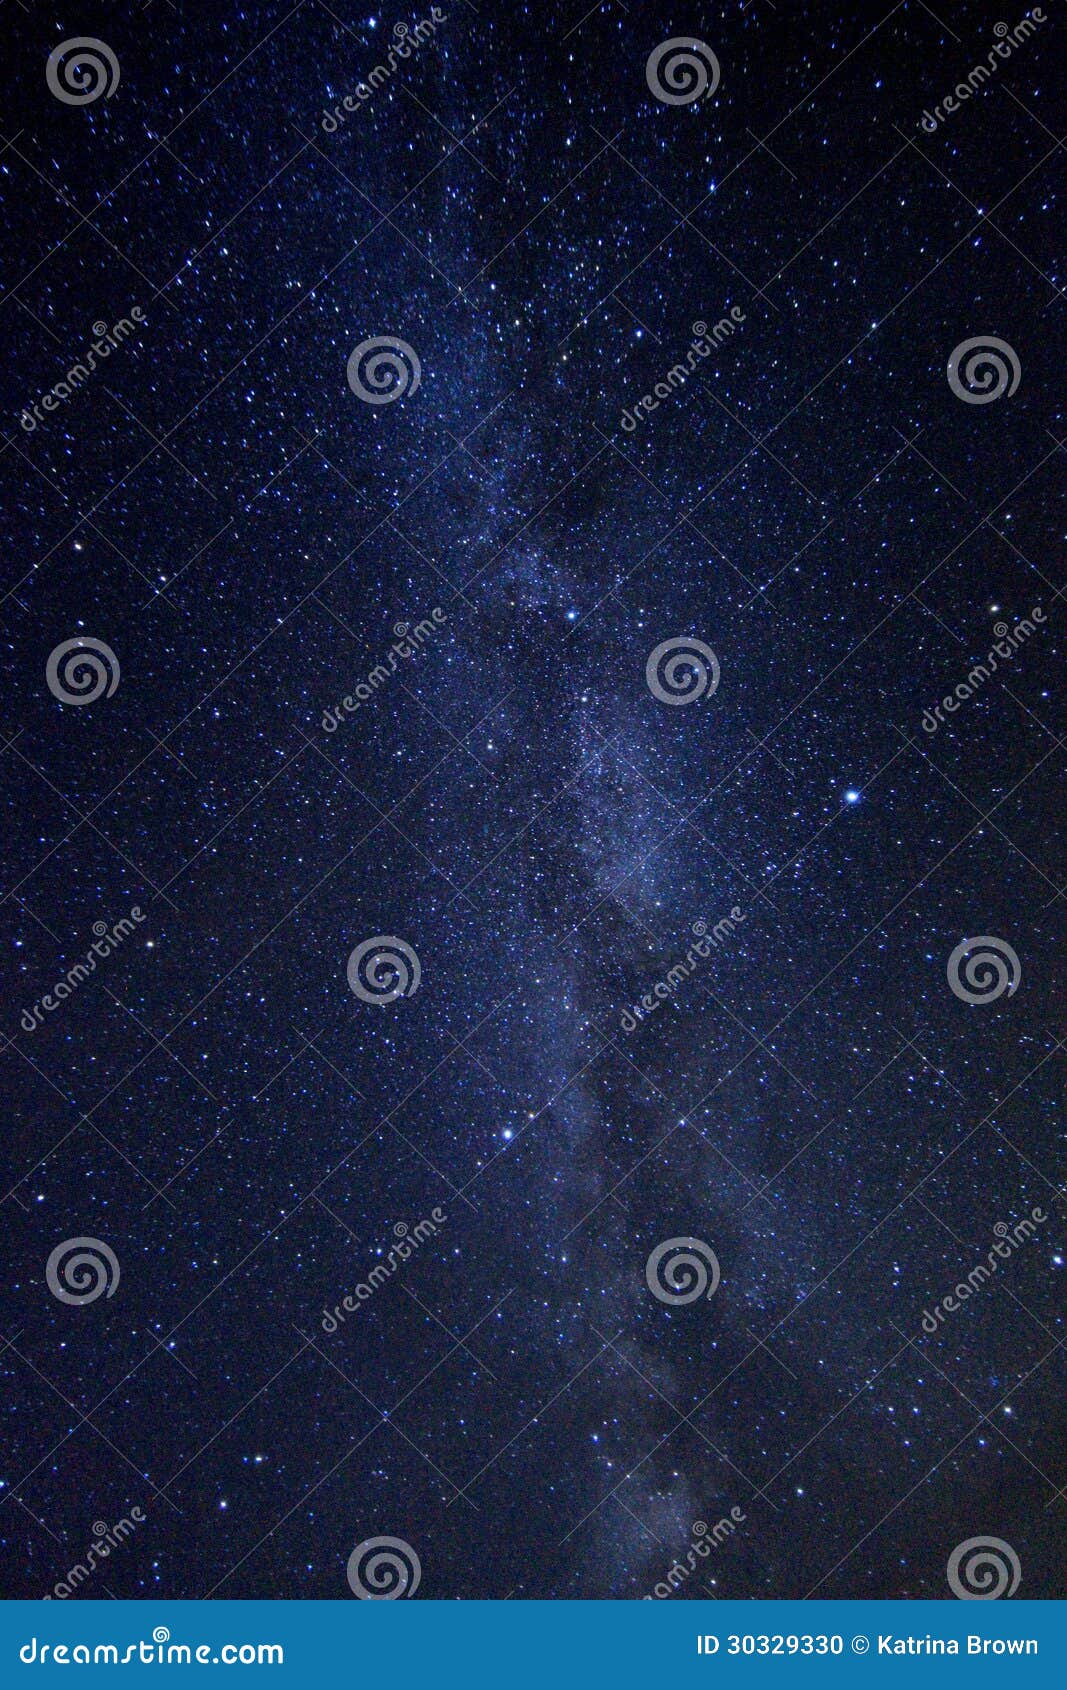 time lapse image of the night stars